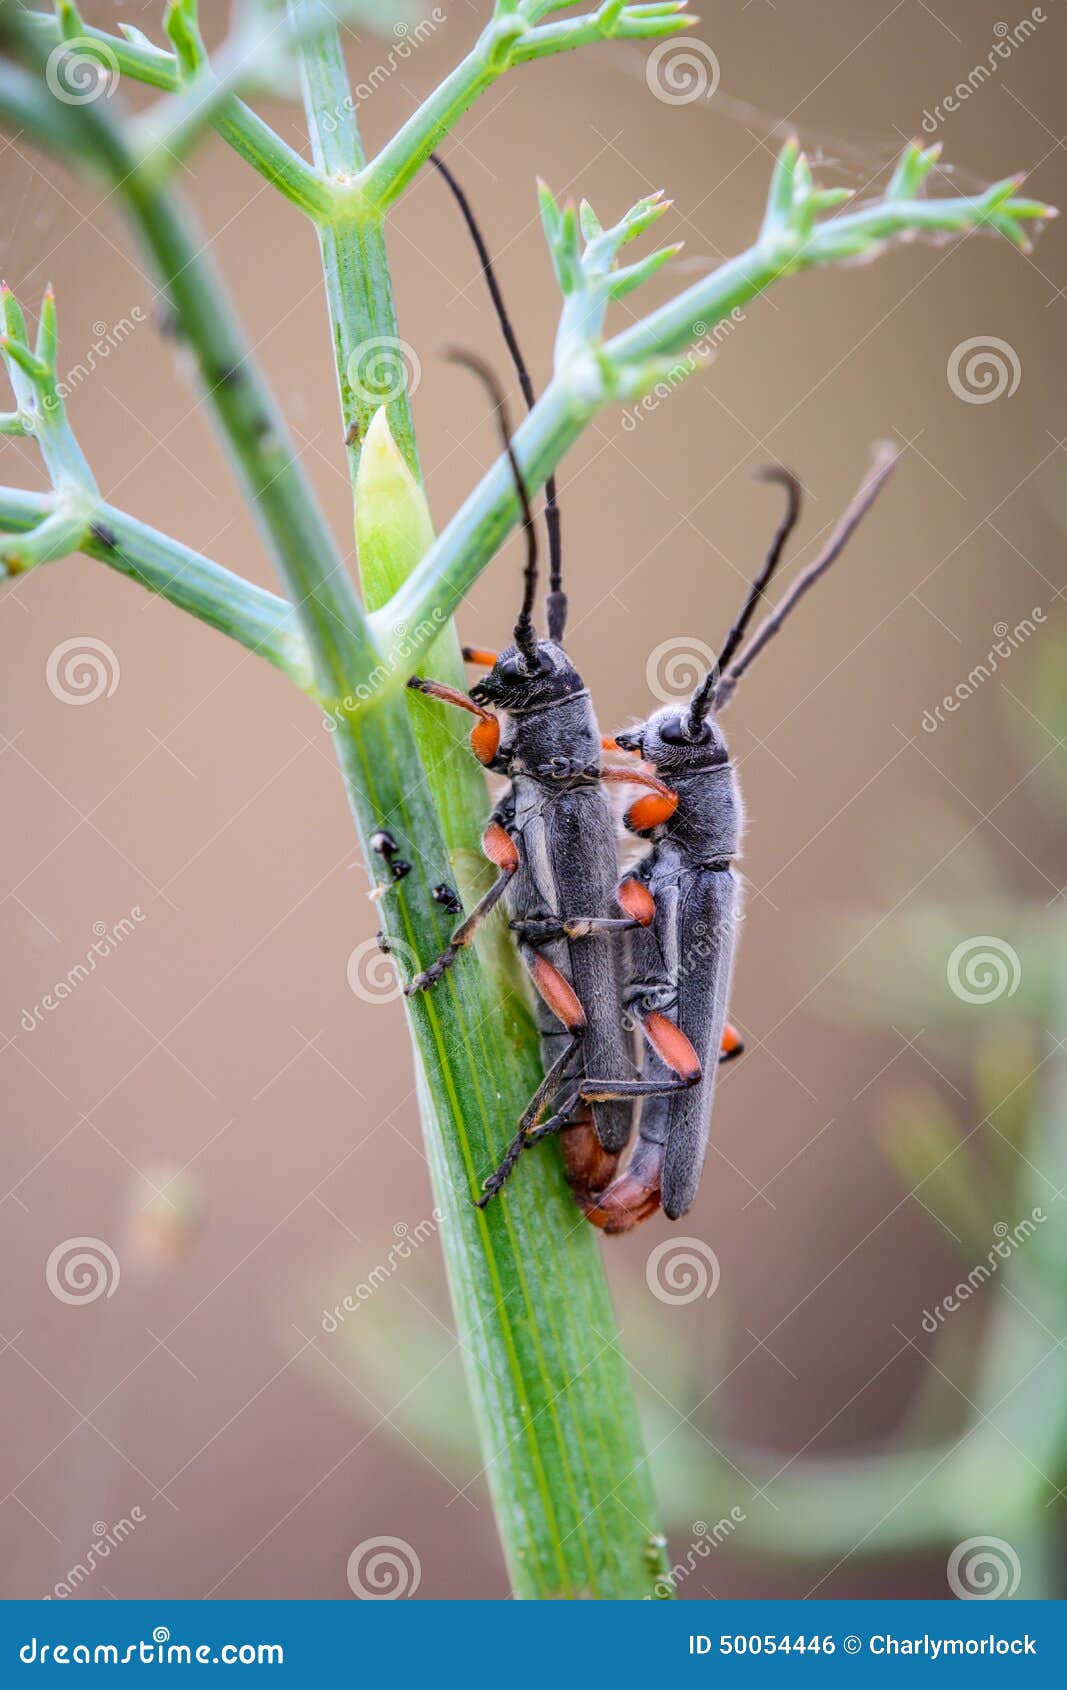 Bug Large Antennas Having Sex for Reproduction Stock Photo pic